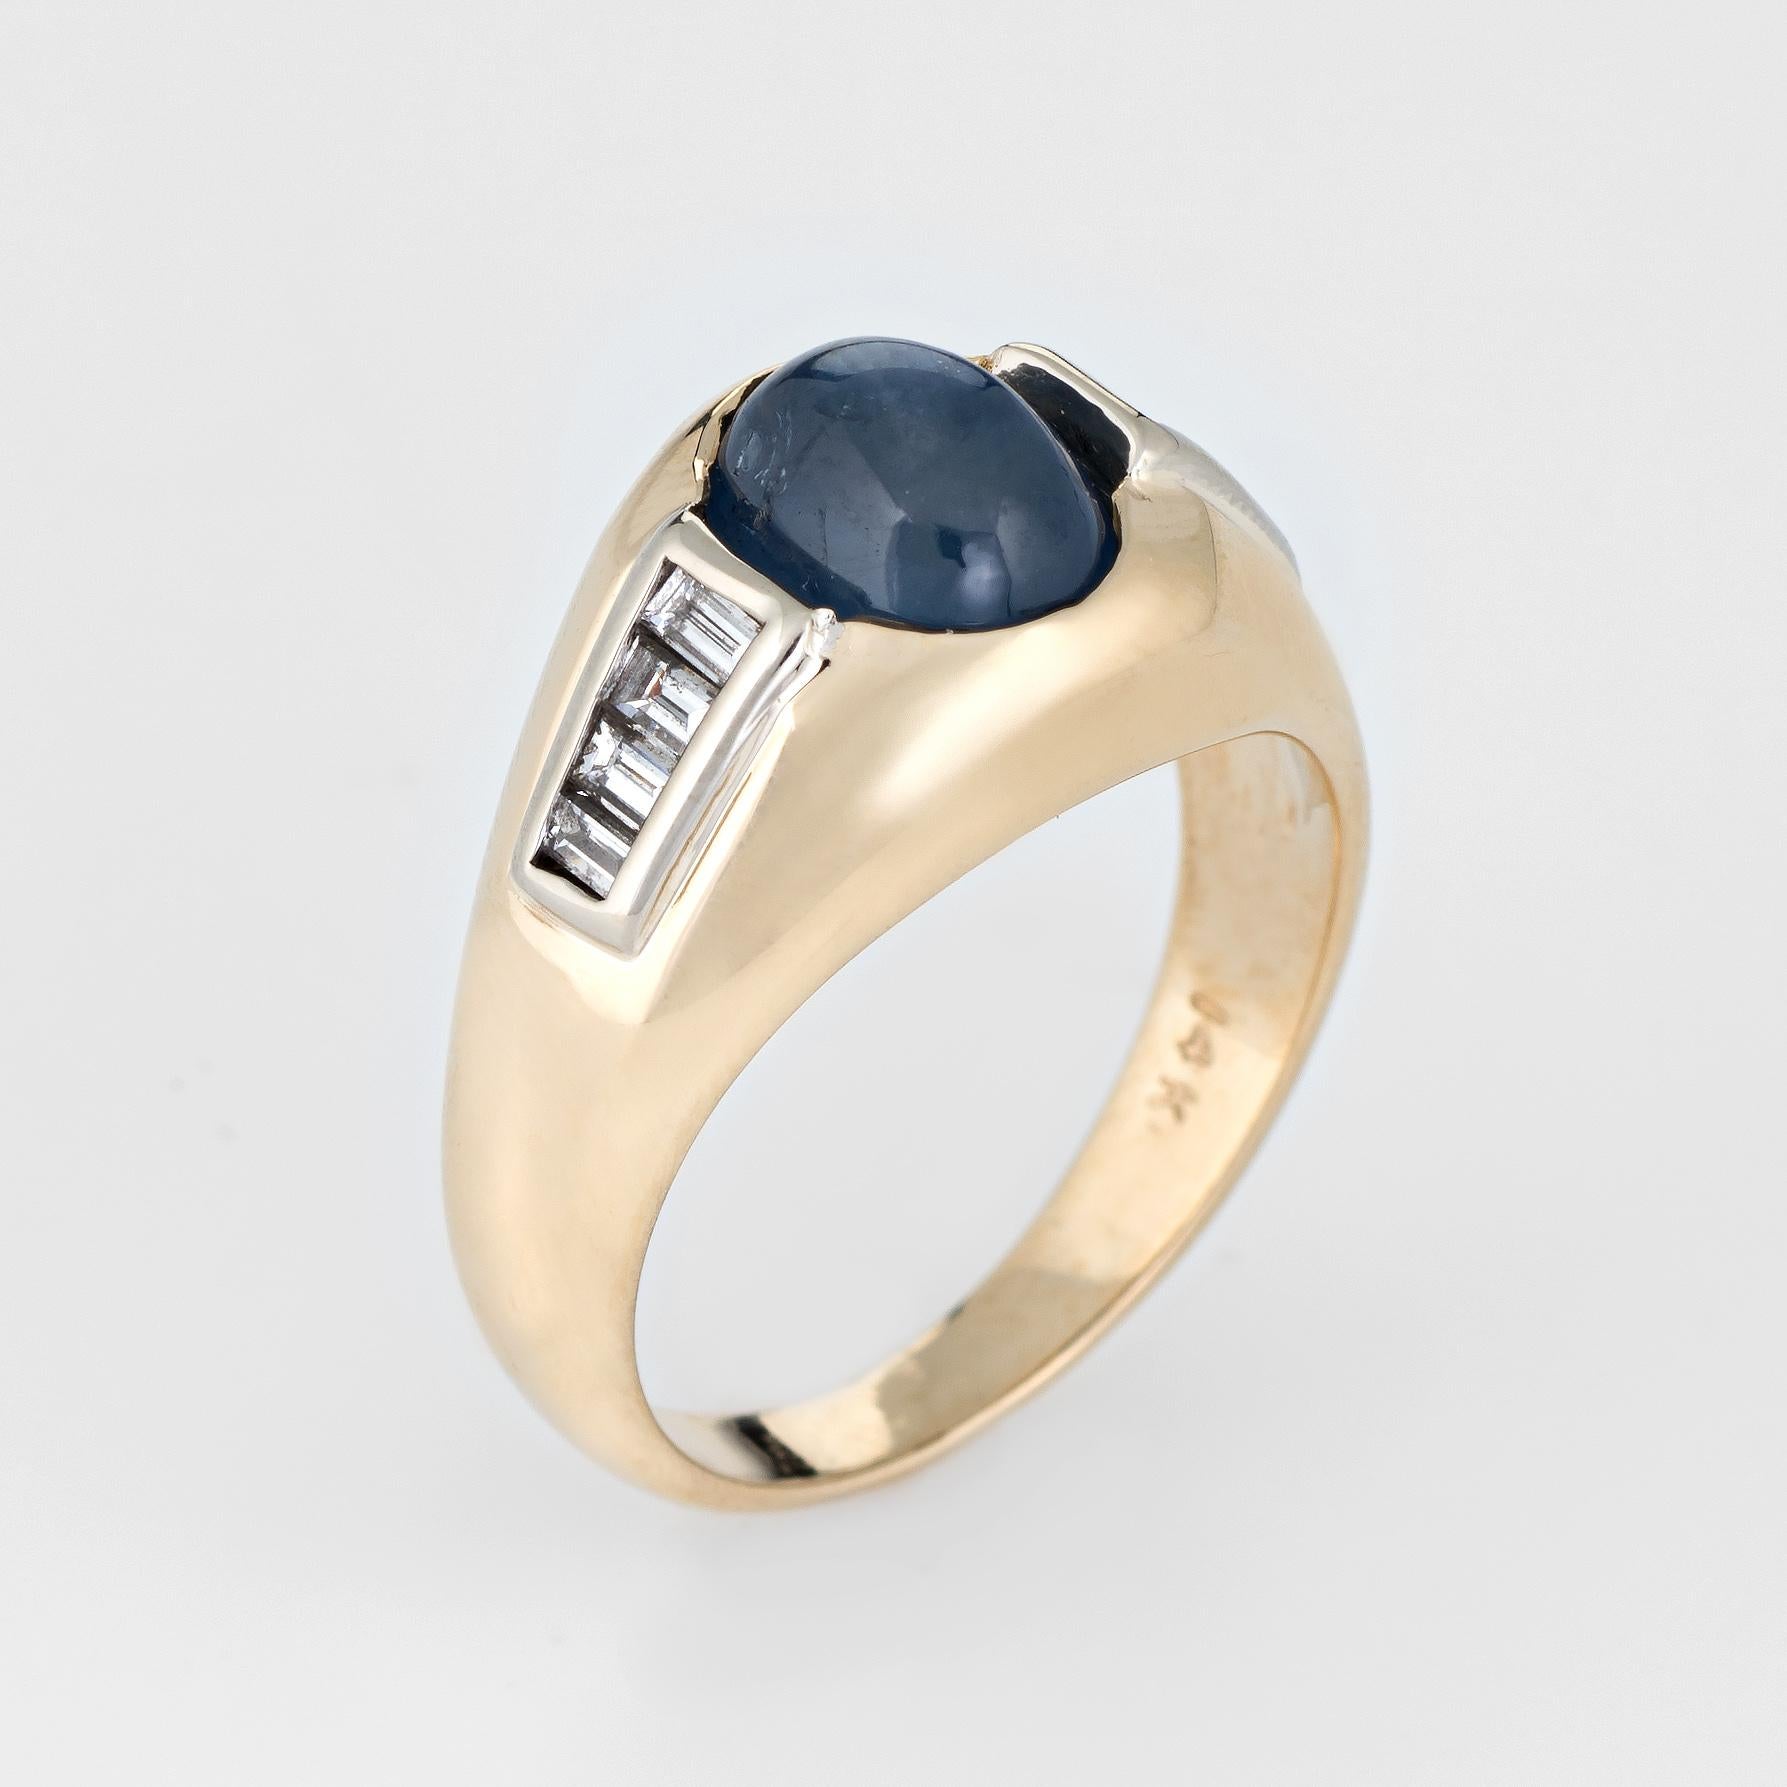 Finely detailed vintage natural sapphire & diamond ring (circa 1980s), crafted in 14 karat yellow gold. 

Natural cabochon cut blue sapphire measures 8mm x 6mm (estimated at 3 carats) is accented with an estimated 0.30 carats of straight baguette